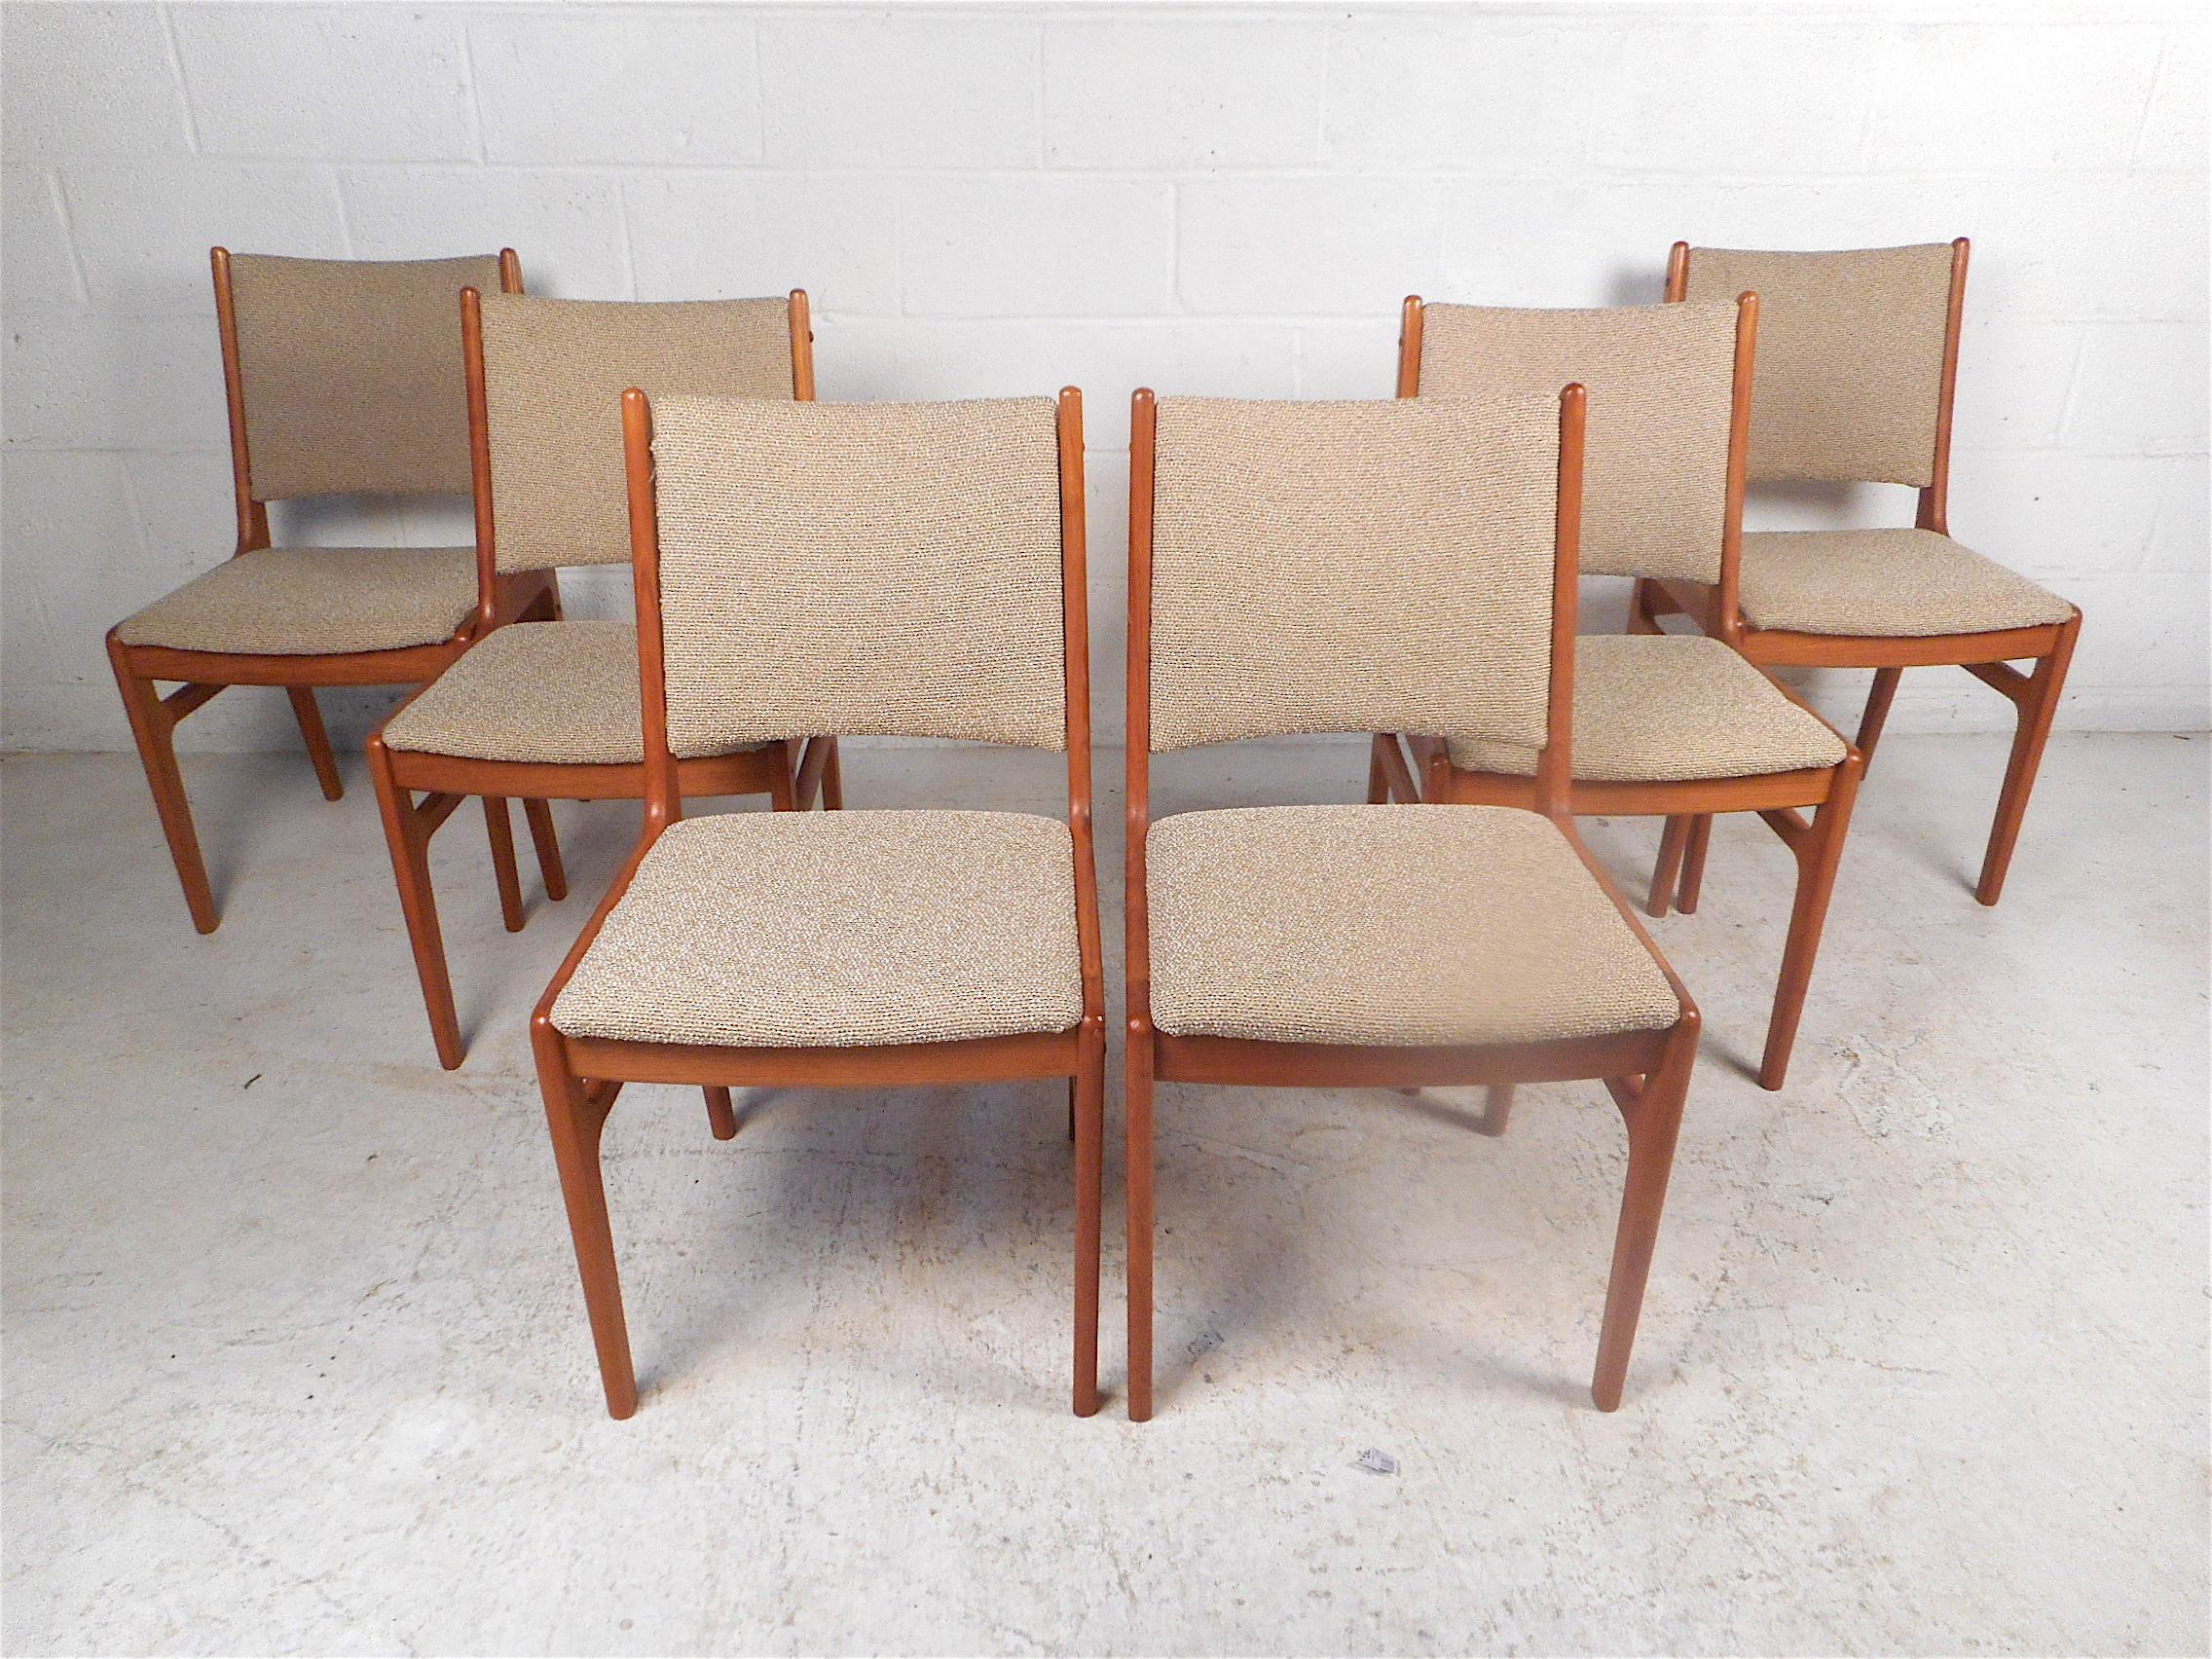 Beautiful set of 6 Danish modern style dining chairs made by D-scan. Teak wood construction with handsome joinery showcased on the frames. Stylish set sure to impress in any modern interior. Please confirm item location with dealer (NJ or NY).